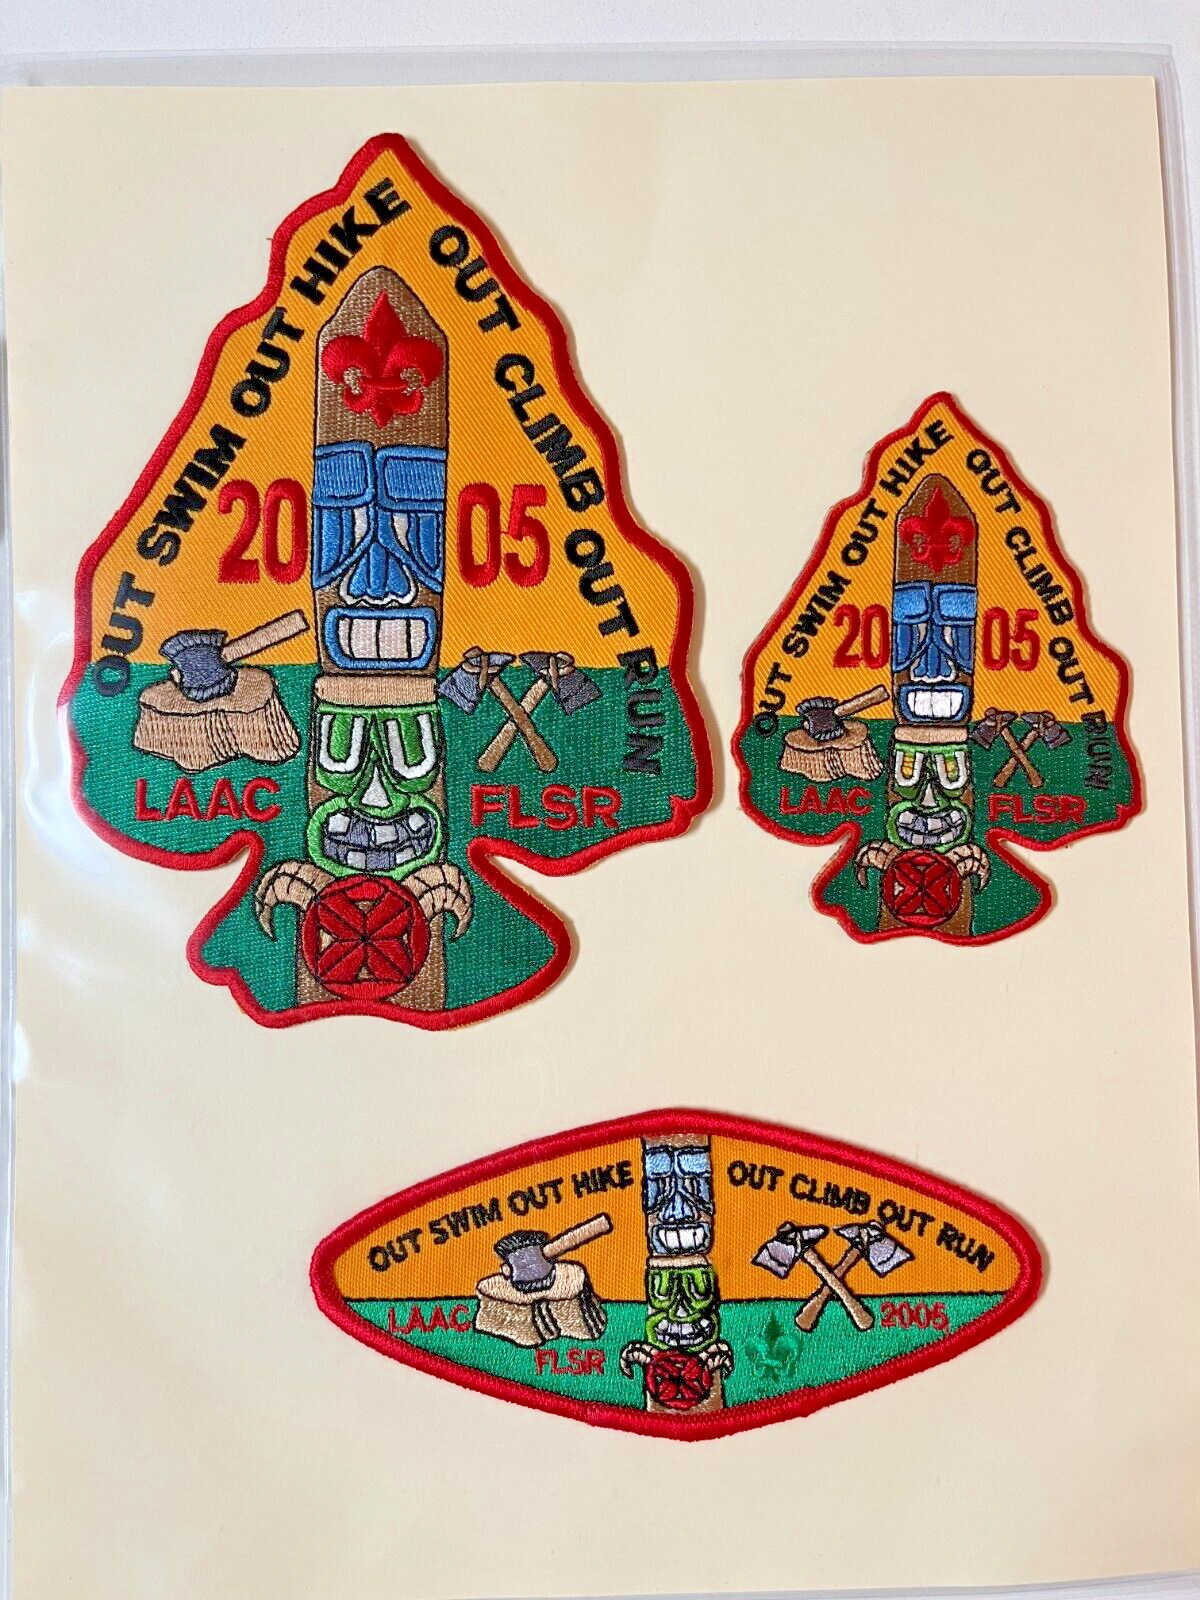 2005 LAAC FLSR FOREST LAWN SCOUT RESERVATION ATTENDEE PATCH SET